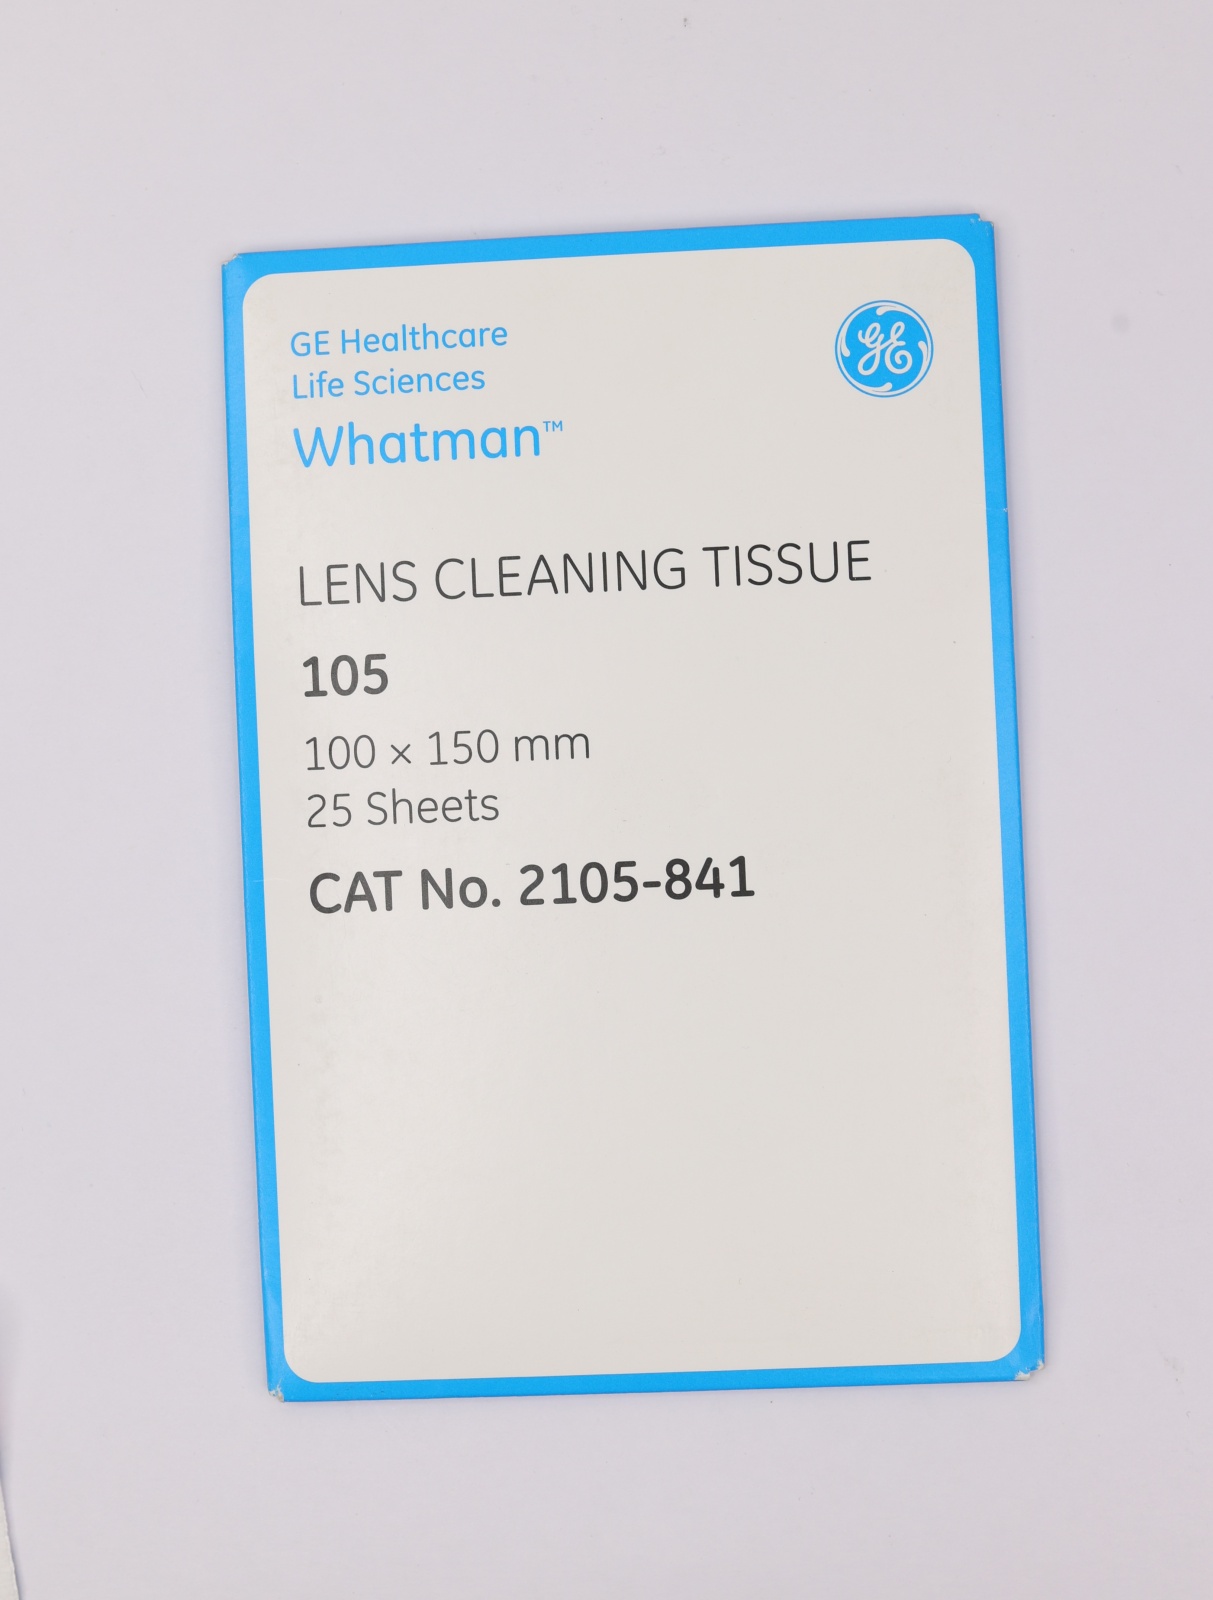 Whatman Lens Cleaning Tissue